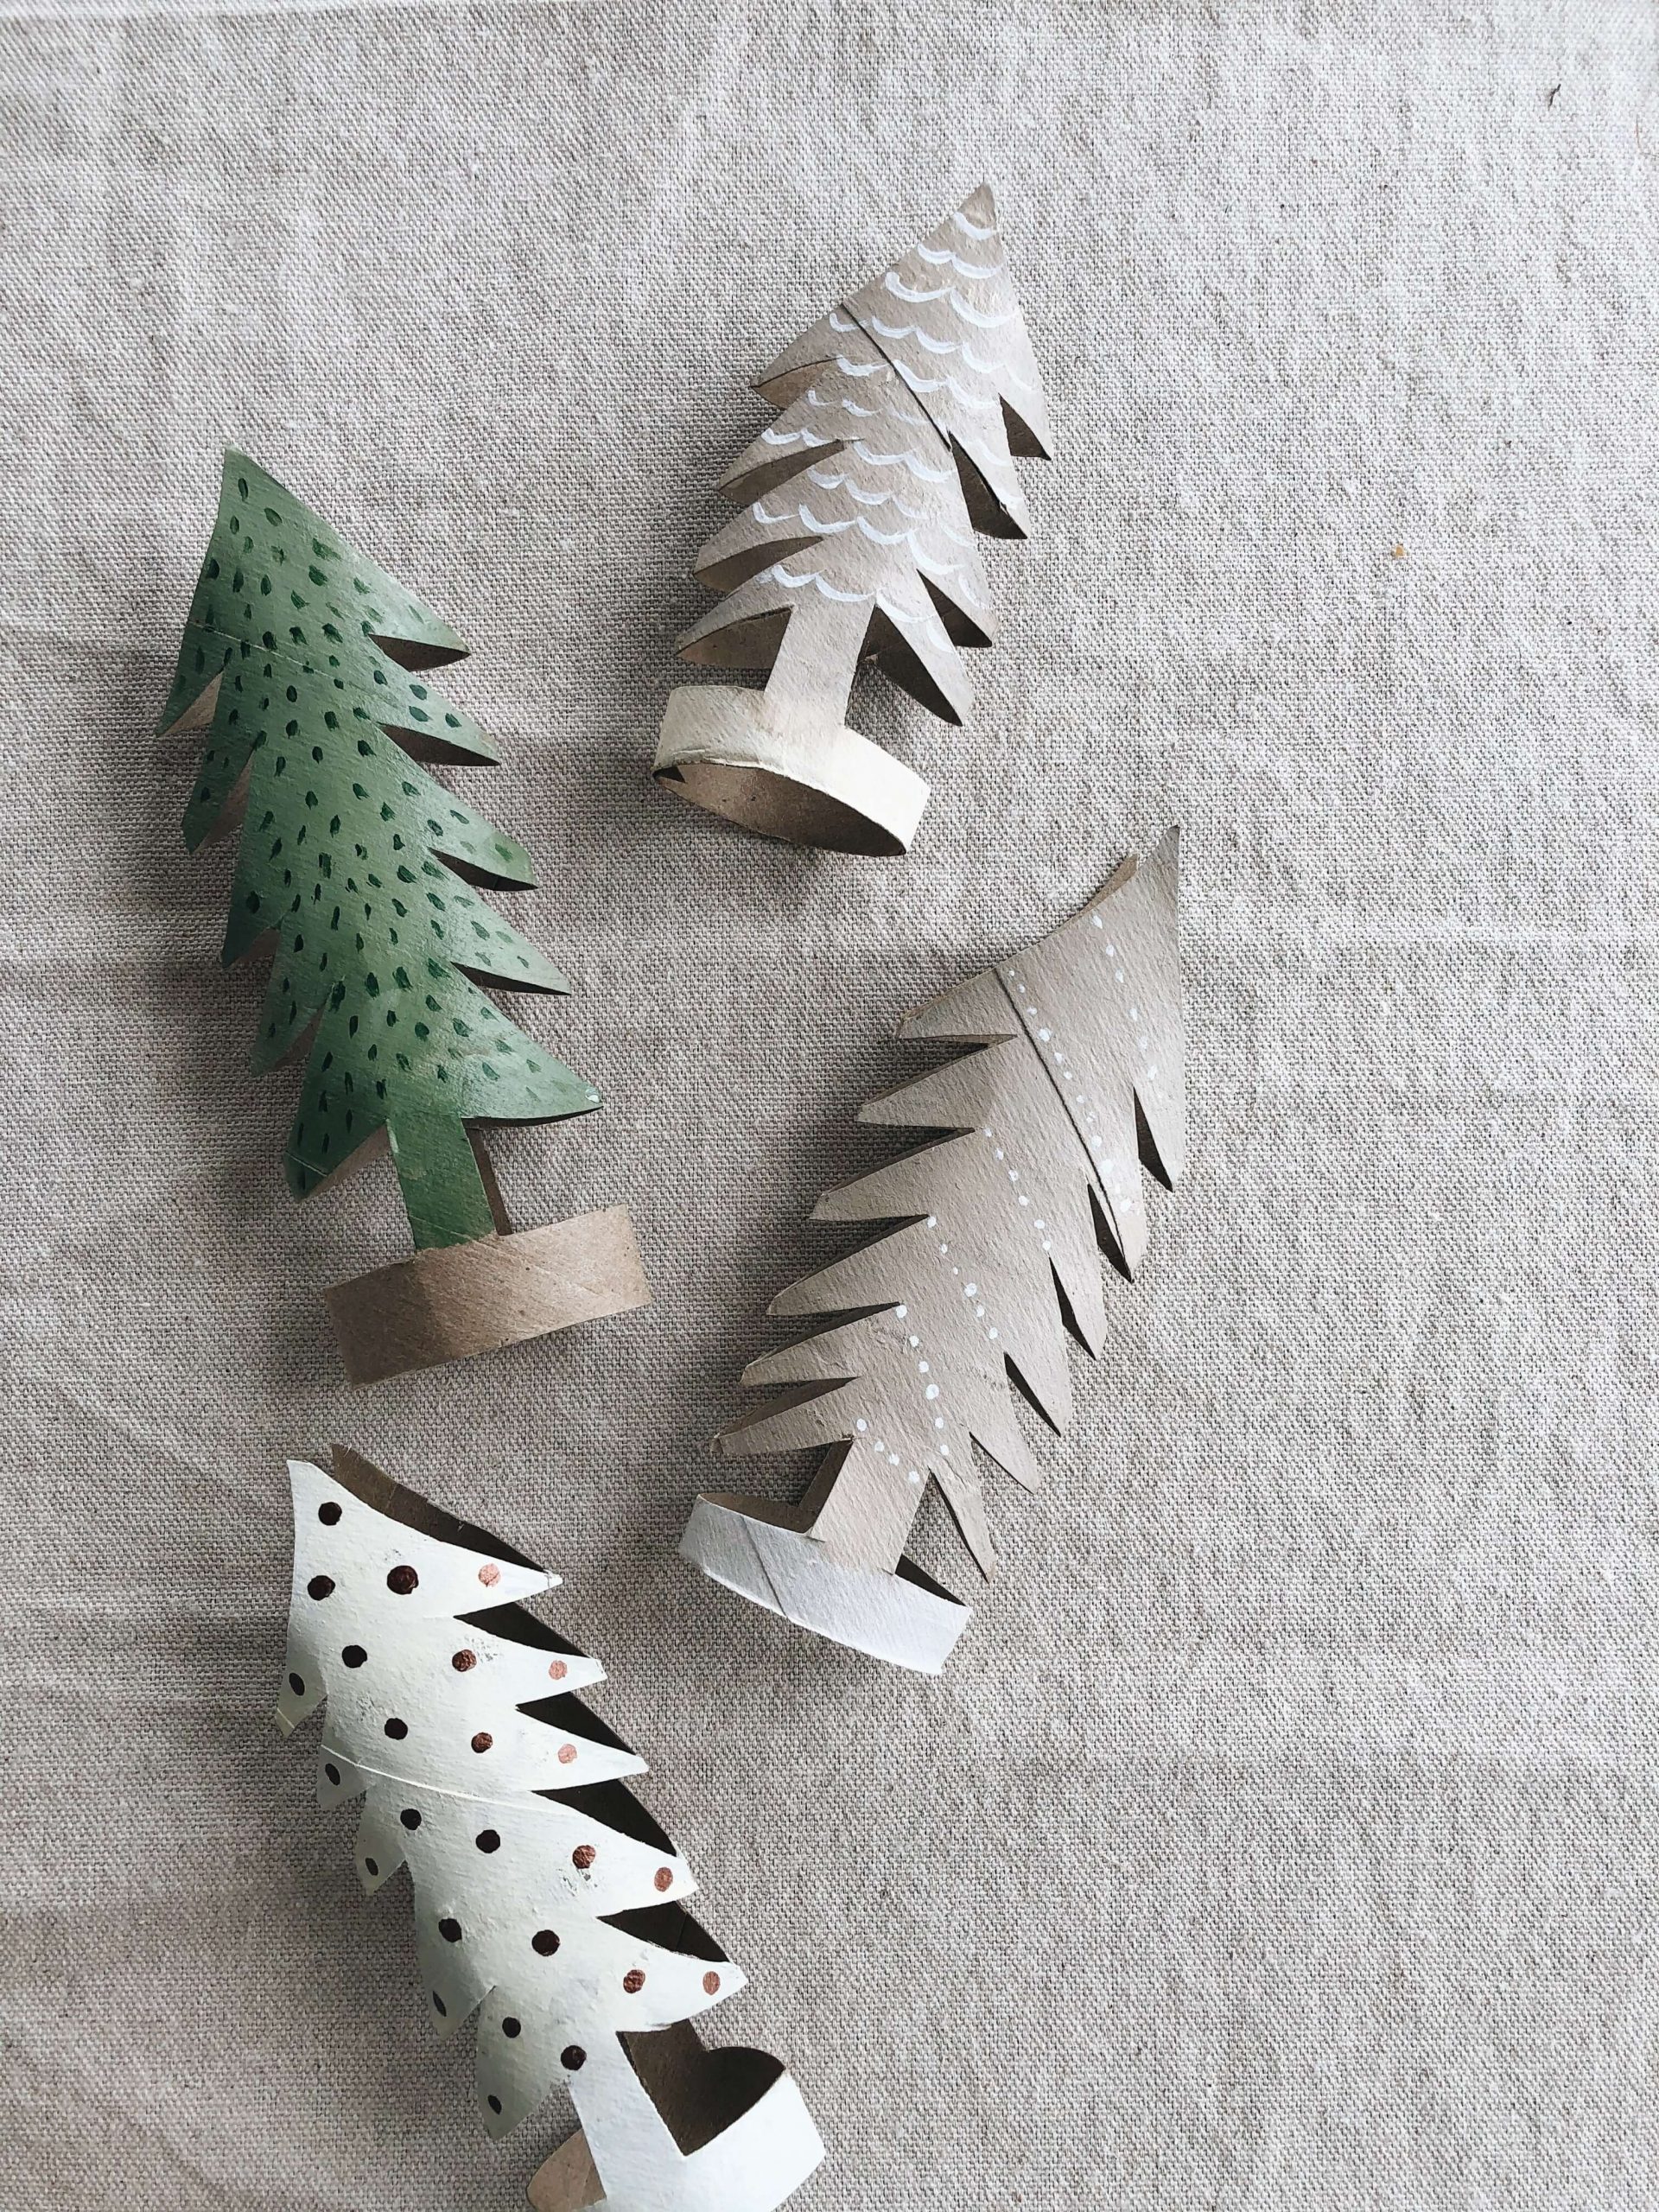 DIY Christmas Tree Forest Craft Ideas Using Recycled Toilet Paper Roll For Christmas